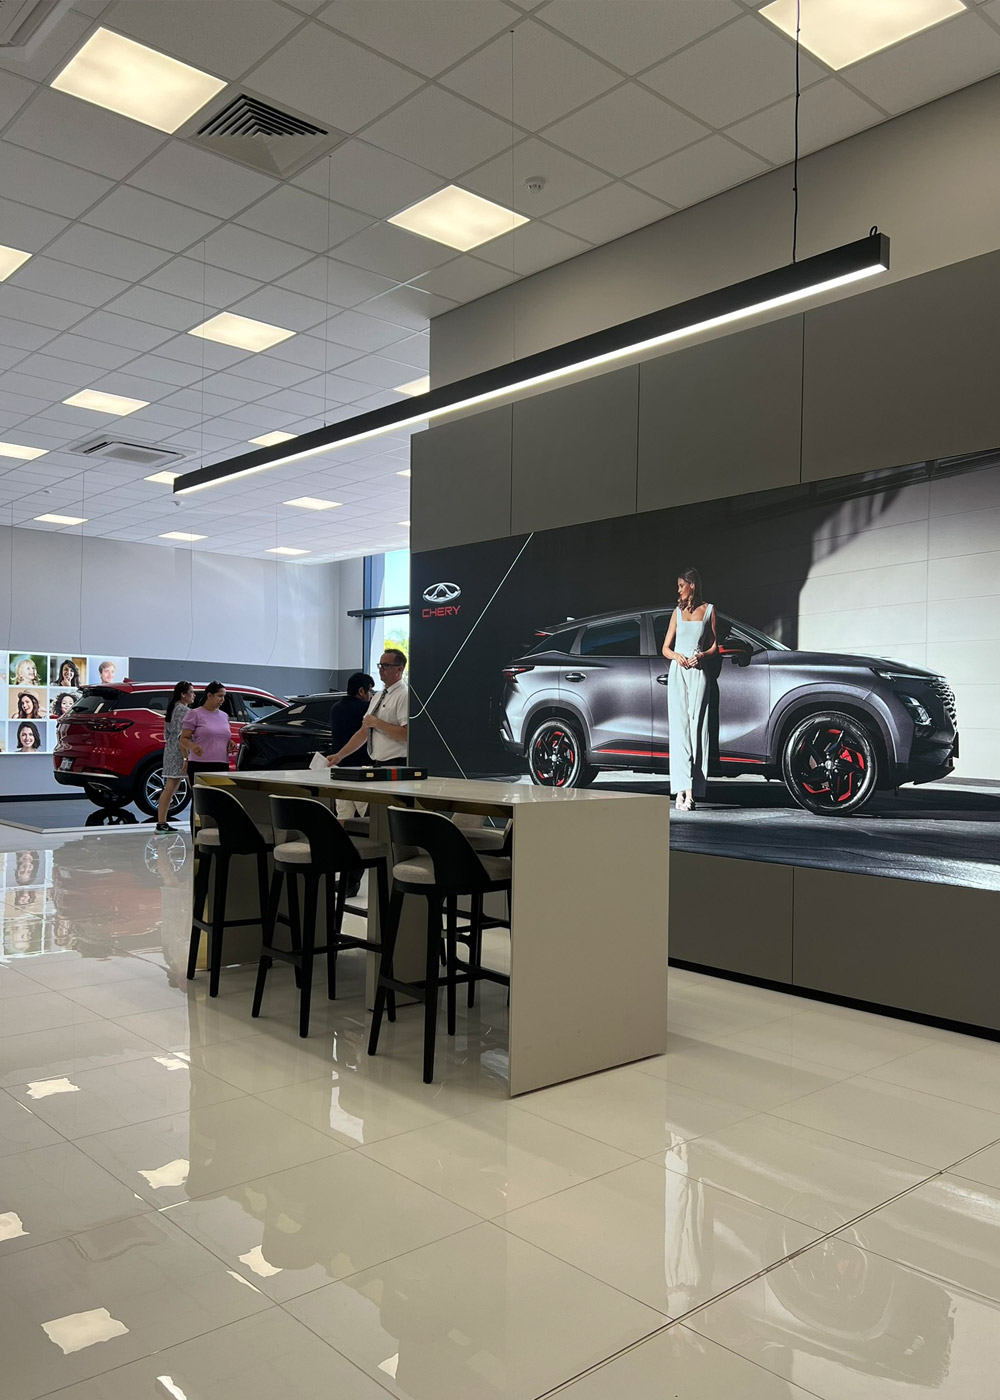 Showroom of Chery Dealership Victoria Park Commercial Build